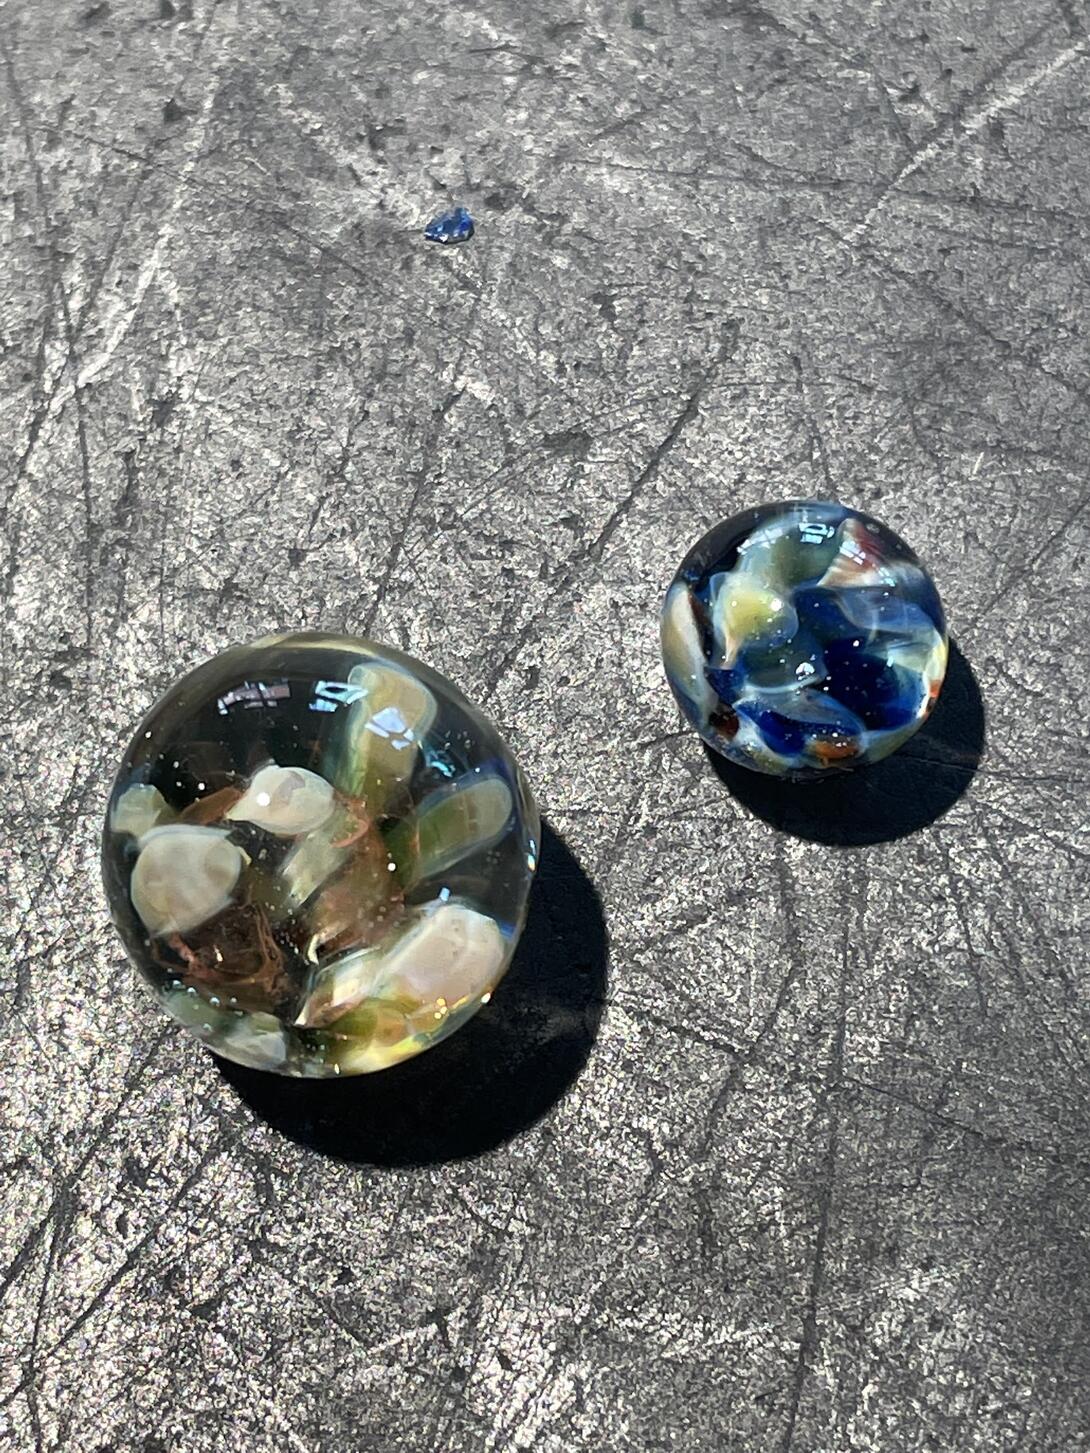 Two glass marbles